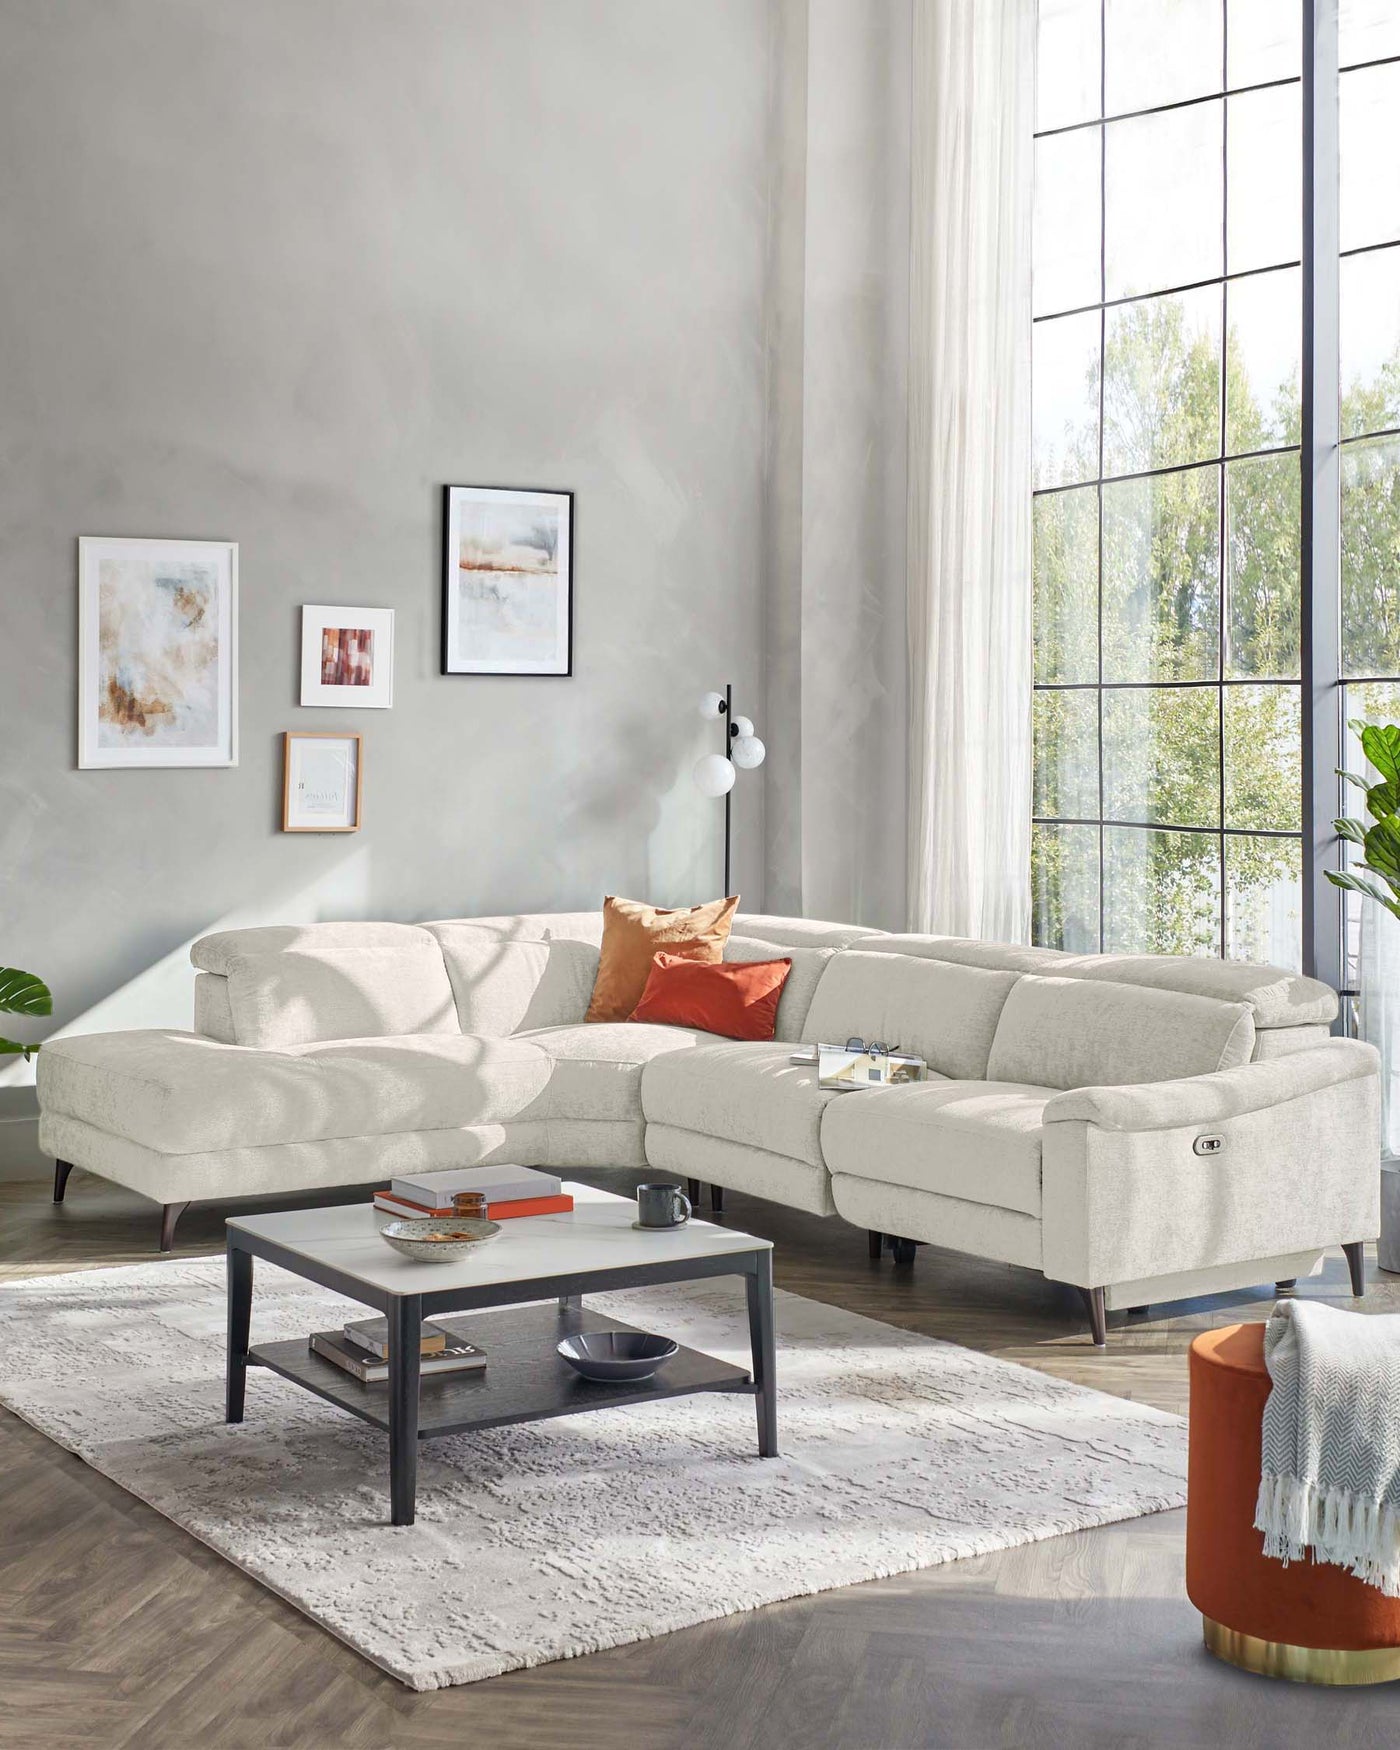 Contemporary light grey sectional sofa with chaise on the right side and a rectangular, two-tiered coffee table with a black frame and grey top, set on a textured white area rug.